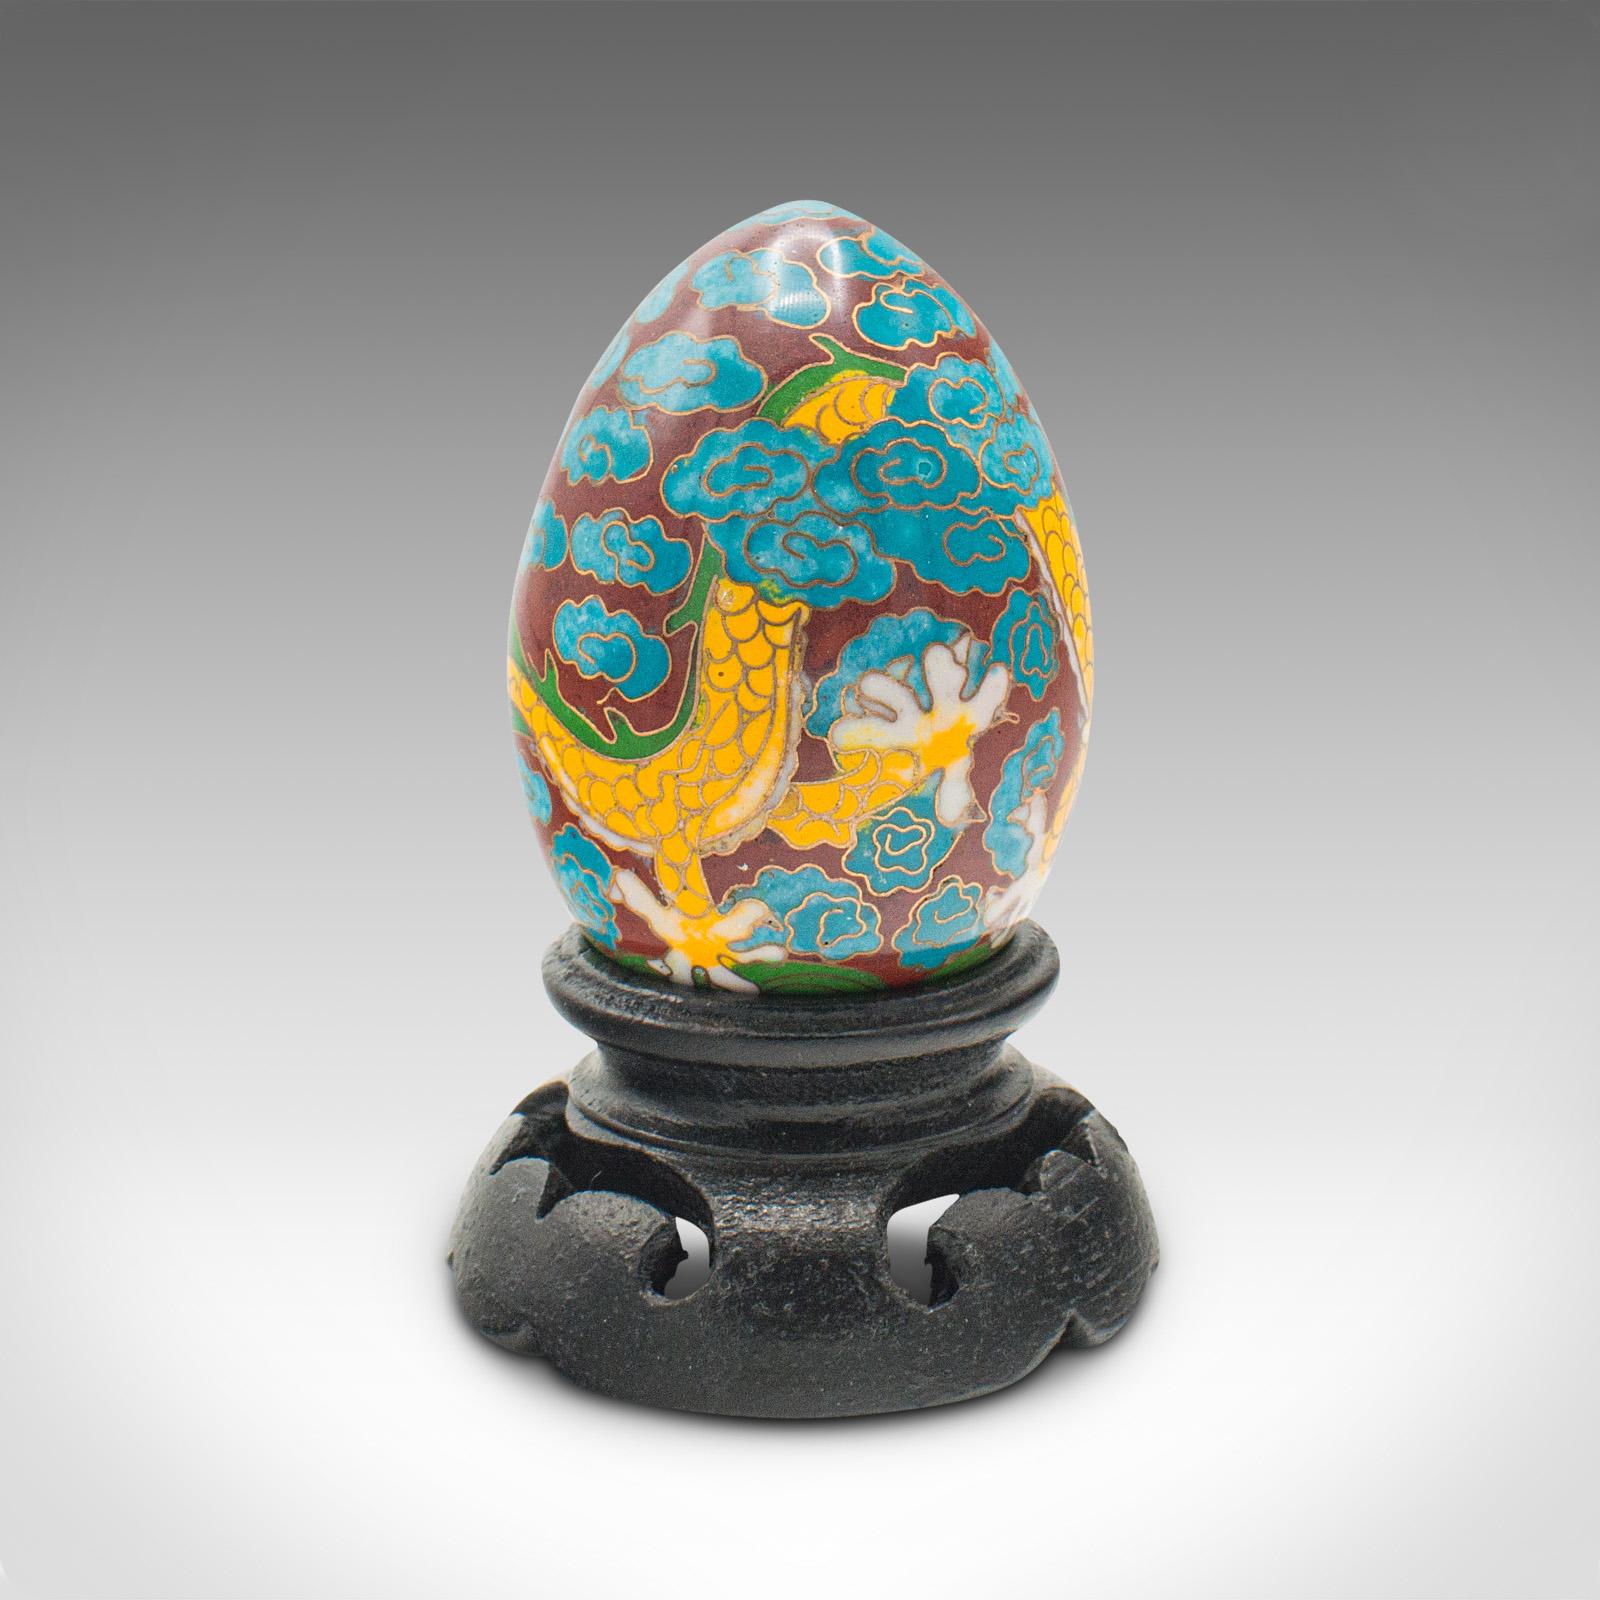 Other Small Vintage Cloisonne Decorative Egg, Chinese, Enamelled, Ornament, circa 1970 For Sale